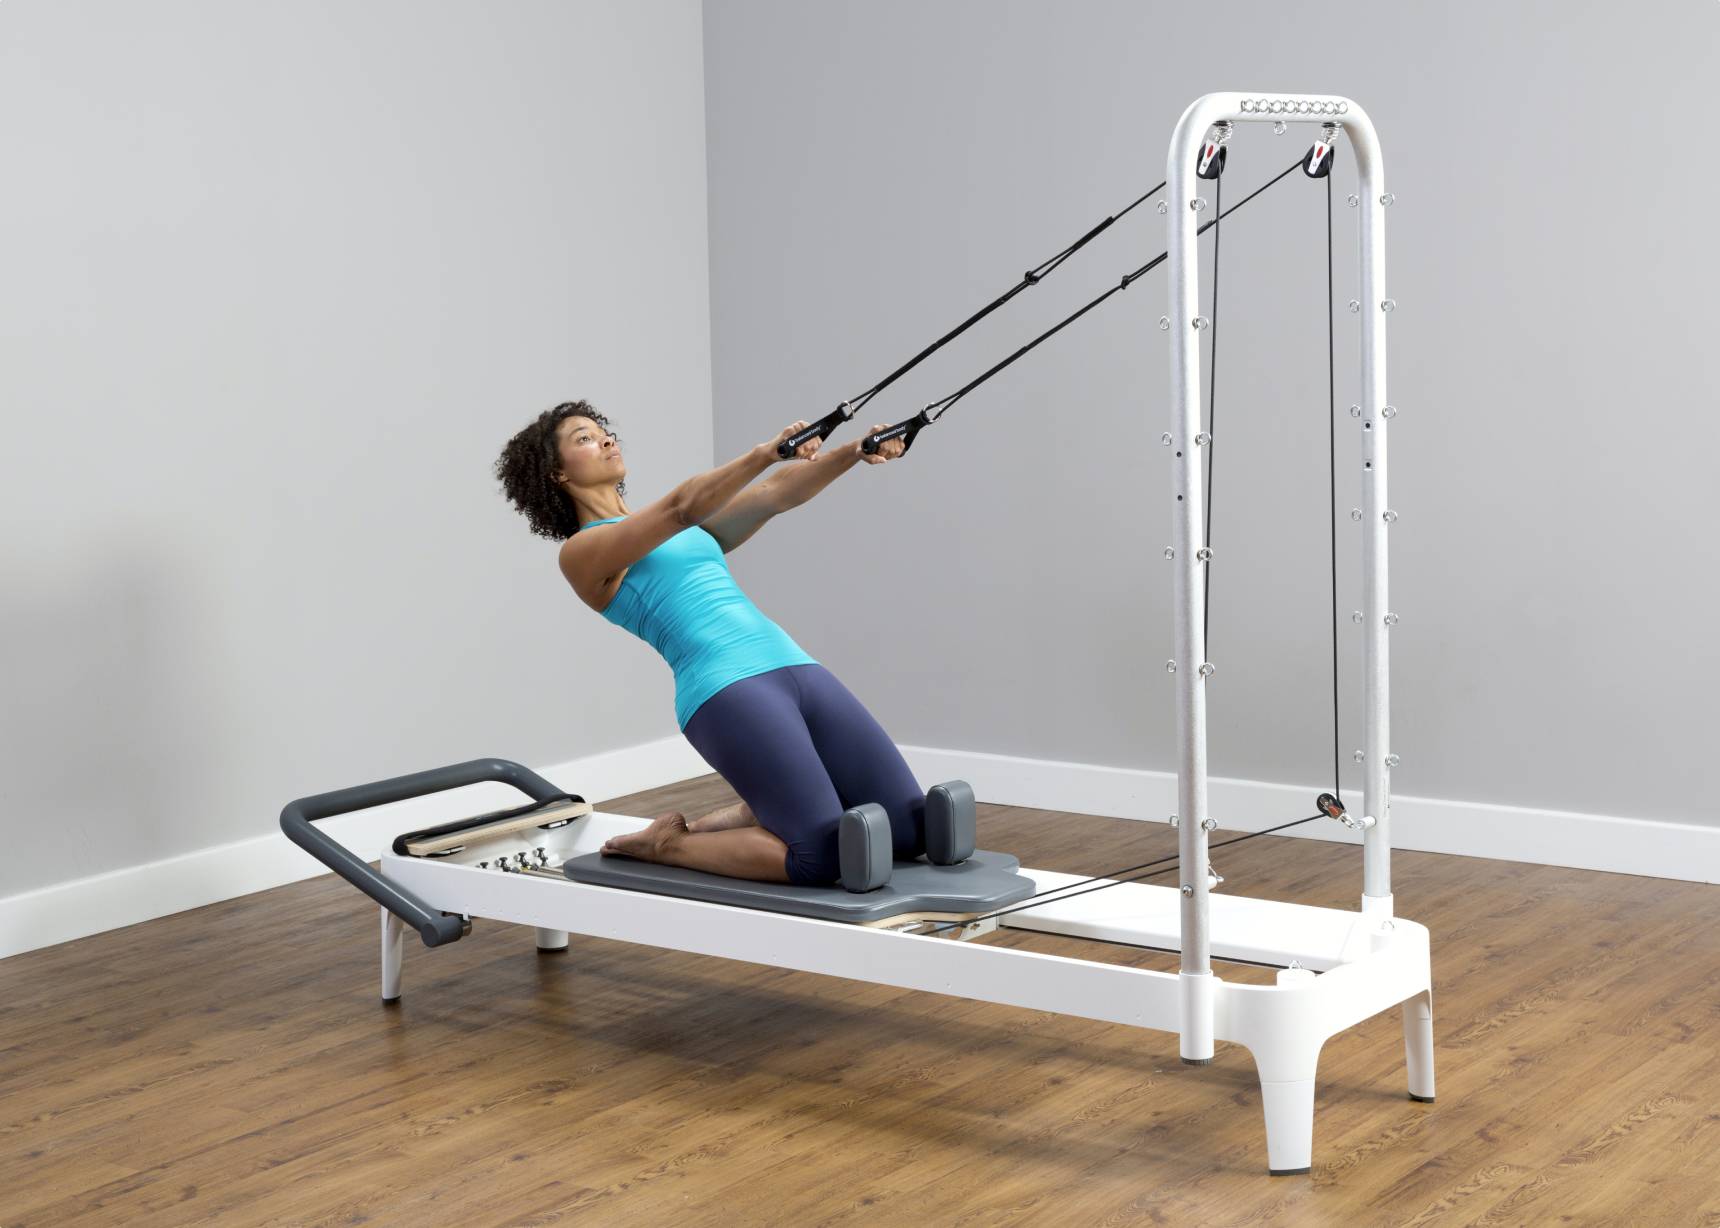 F.I.T. (Functional Integrated Trainer) Kit in-use photo